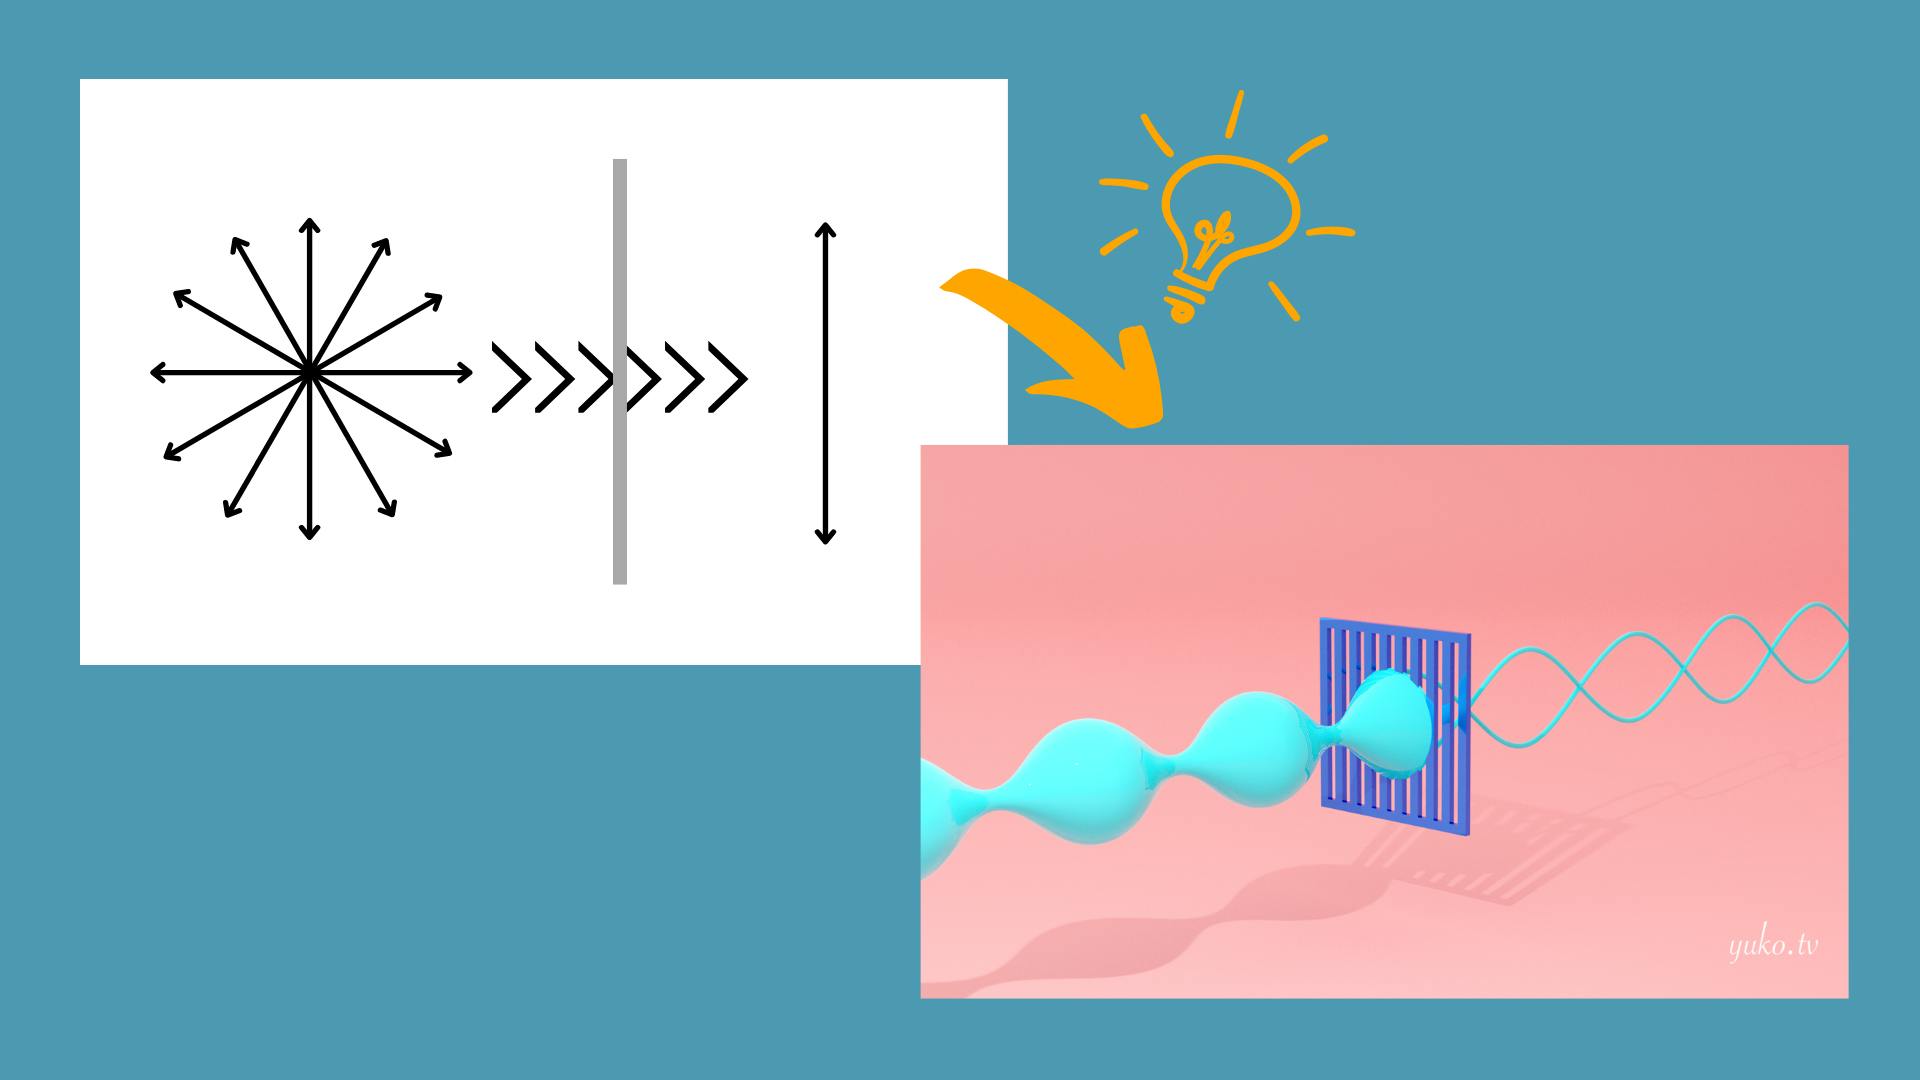 A visual interpretation of how Suki intends to demonstrate polarisation in modern physics through animated 3D models, displaying how 3D modeling and innovative educational approaches can improve how learners can understand polarisation (the ability of waves to oscillate in more than one direction).